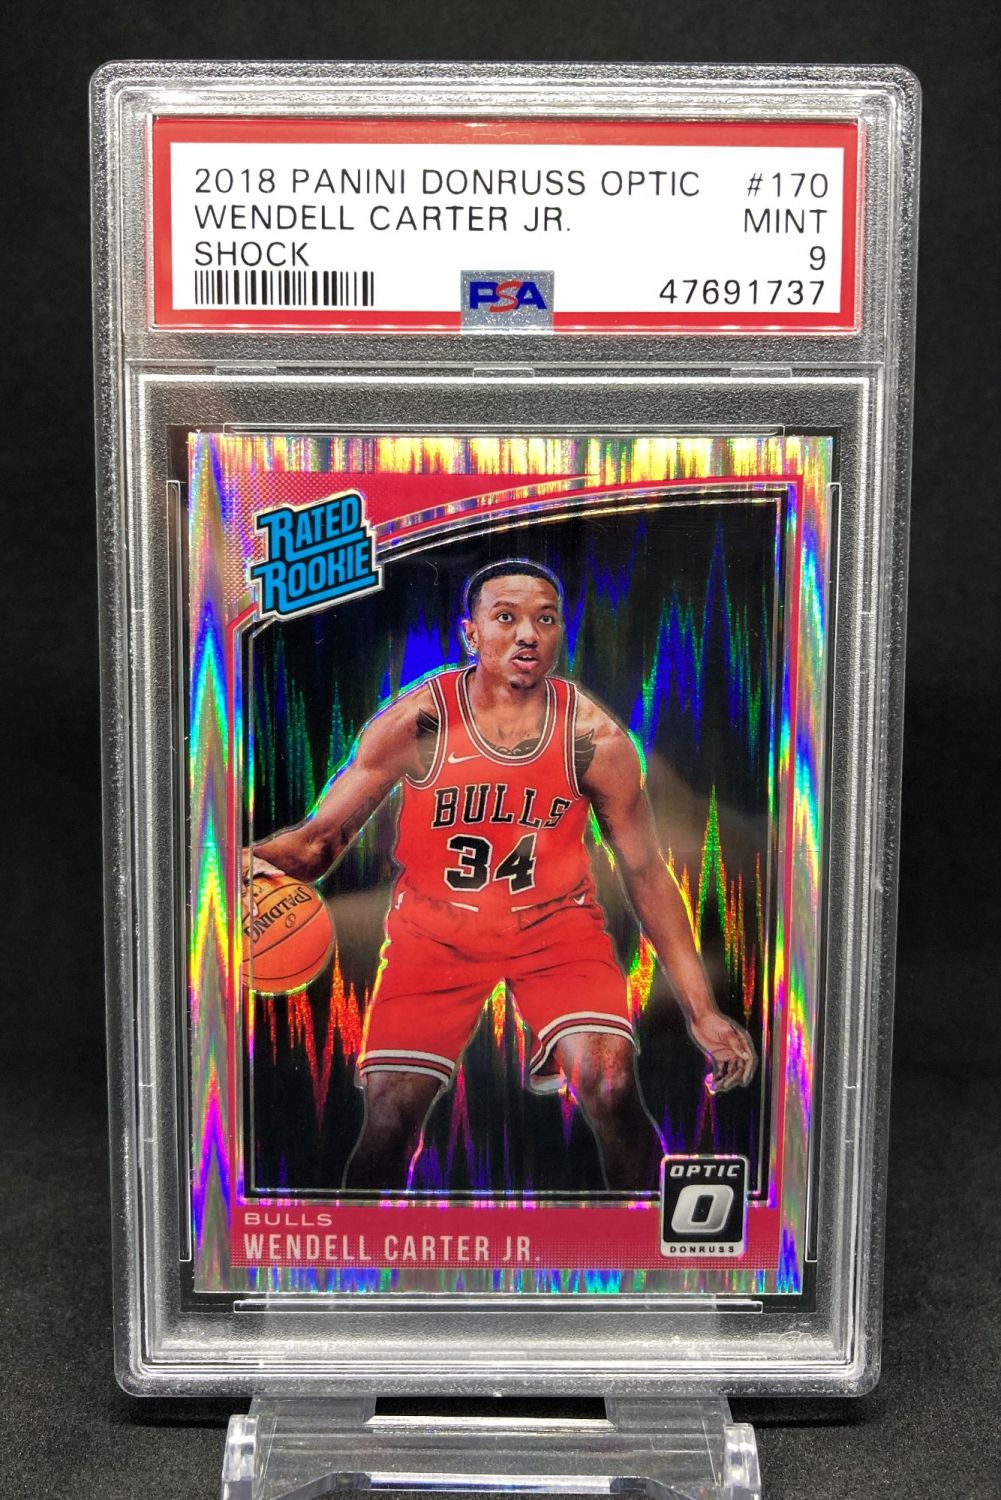 2018-19 Panini Donruss Optic WENDELL CARTER JR Rated Rookie Shock Prizm #17